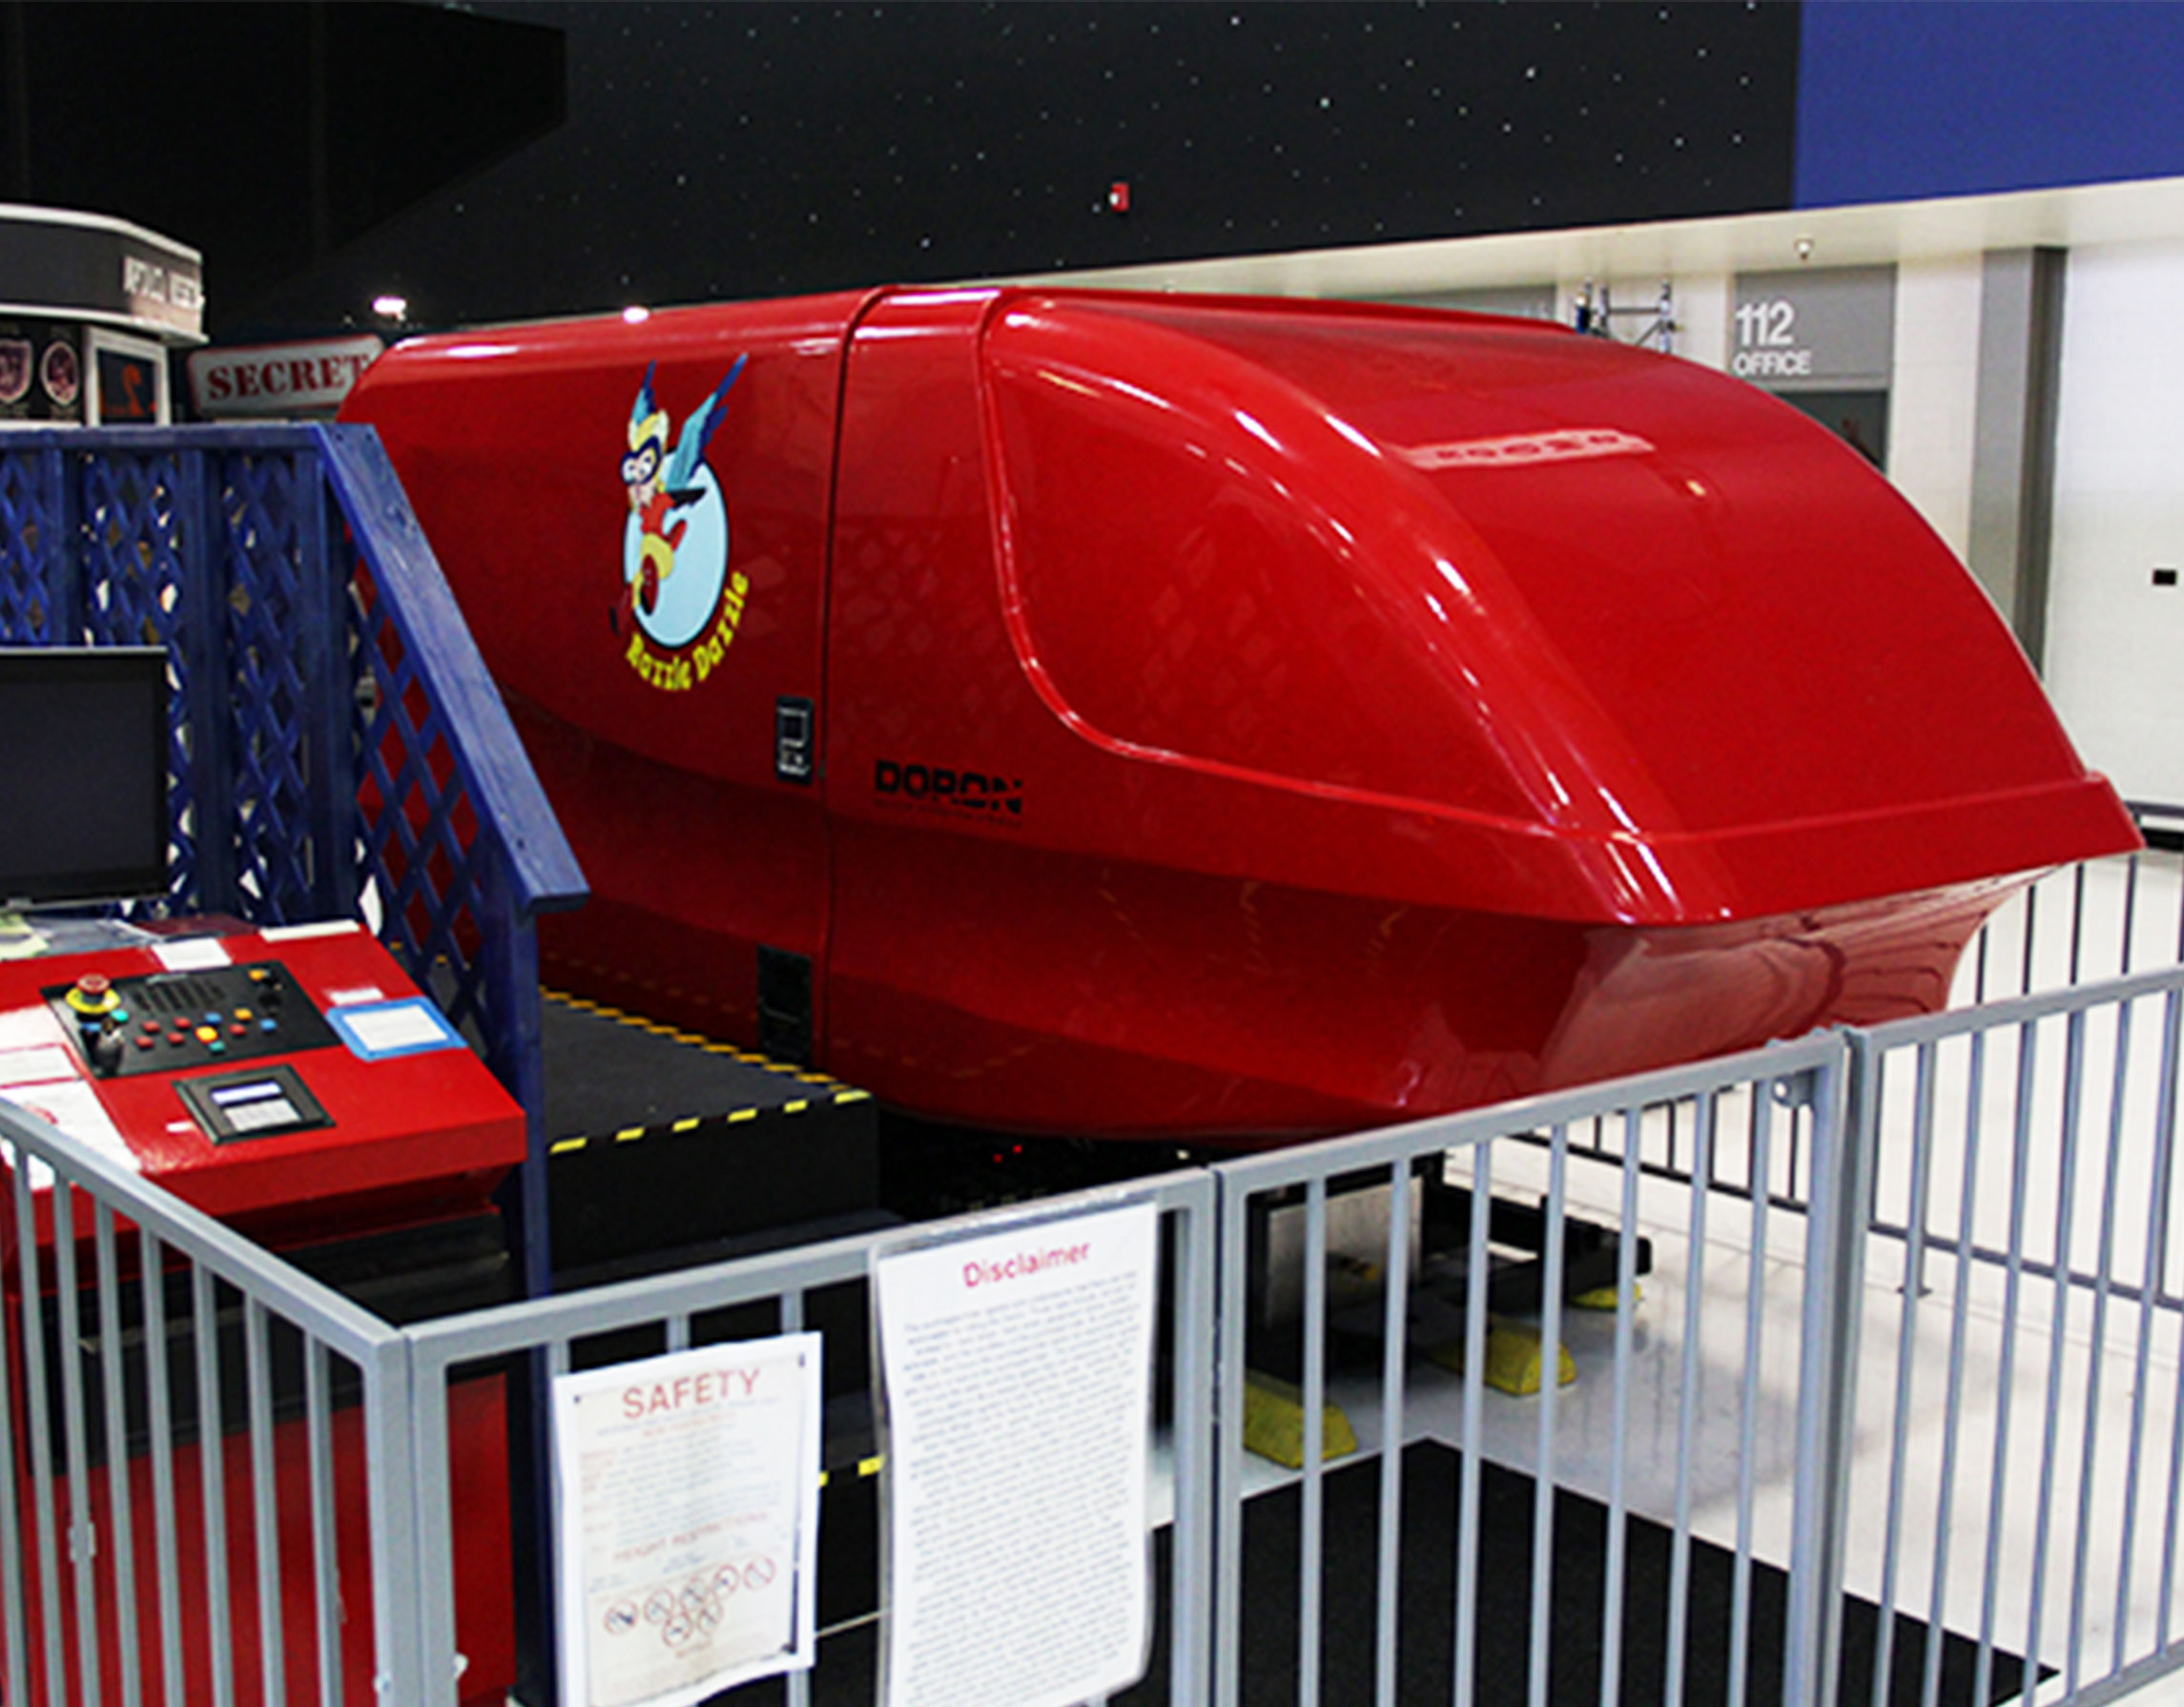 Flight Simulators and Motion Rides - Museum of Science and Industry